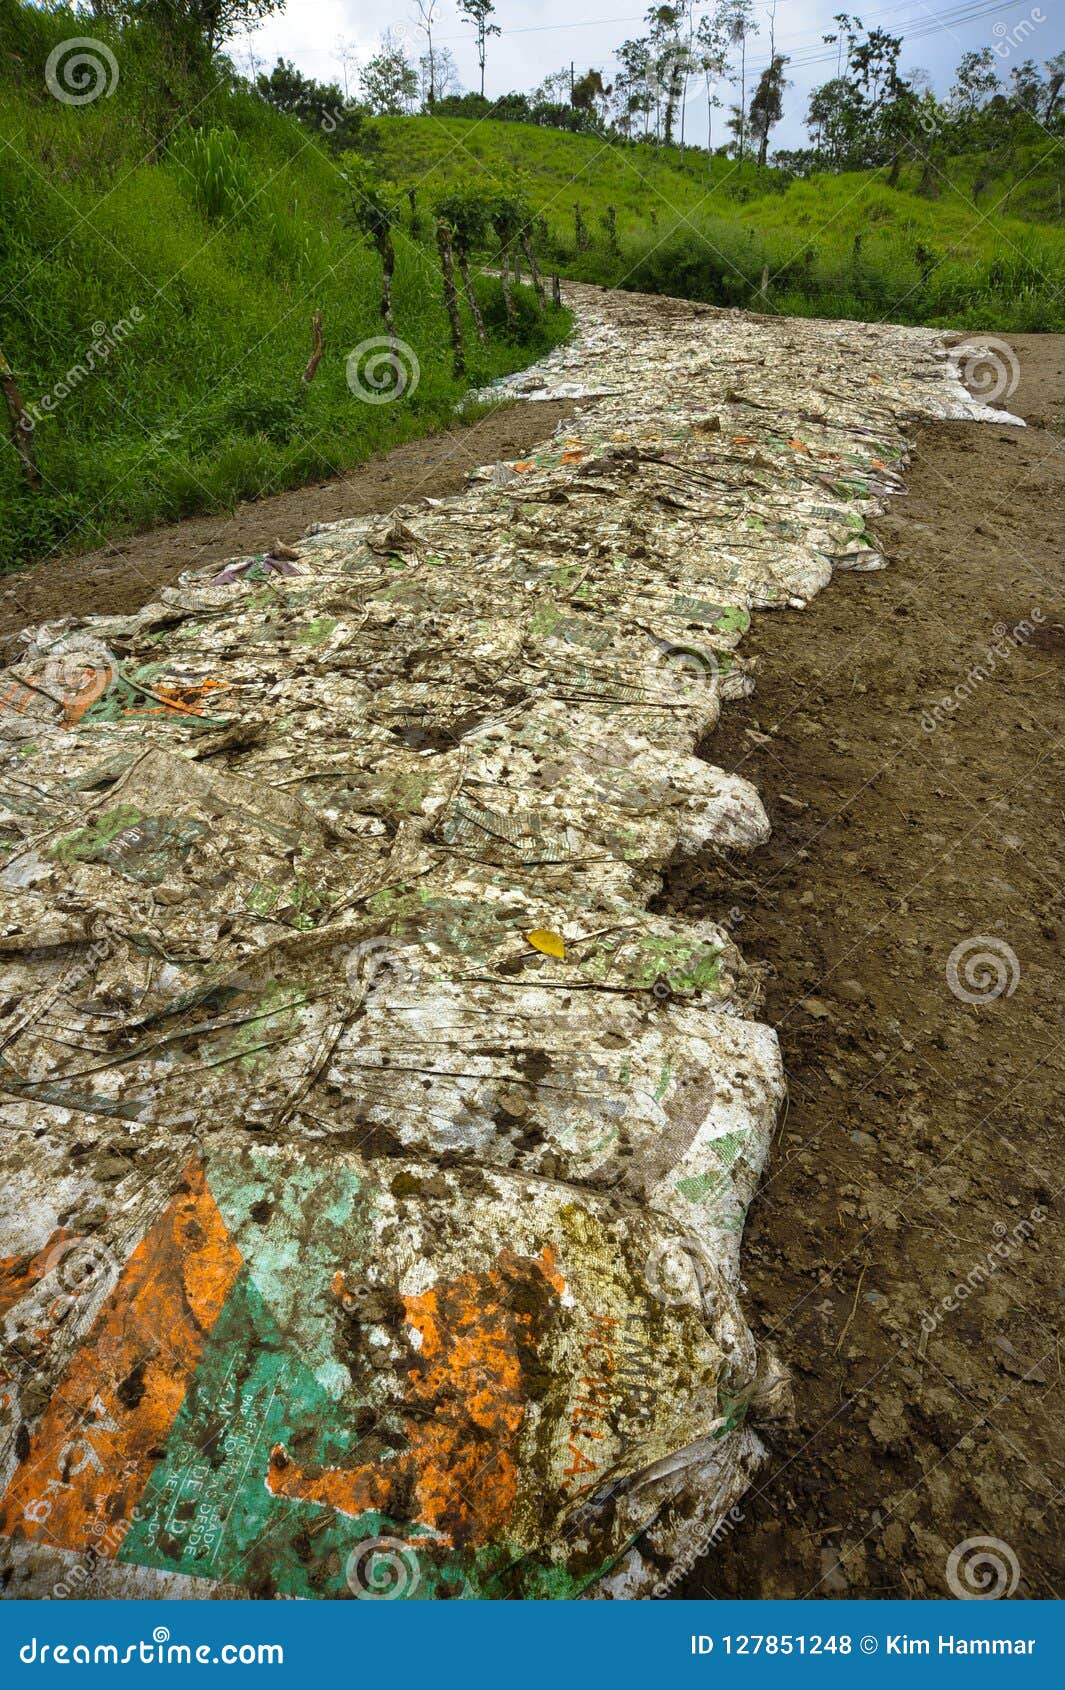 manure bags are used for traction for vehicles on dirt road in the alajuela province in costa rica.